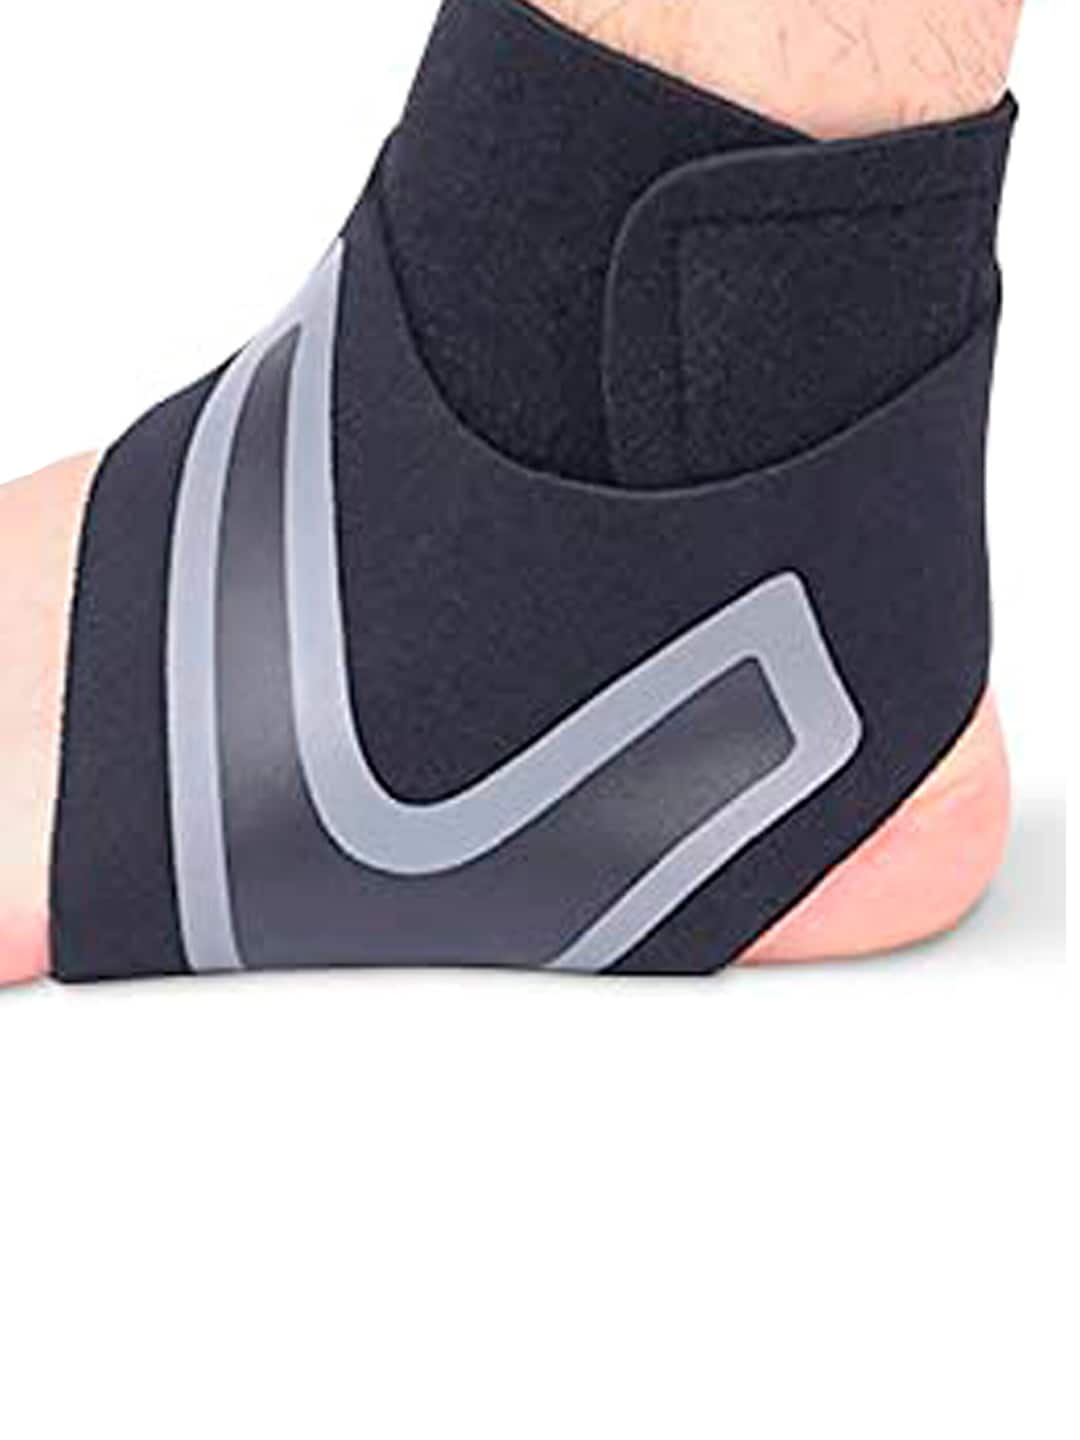 BOLDFIT Black & Grey Ankle Support Wrap for Pain Relief Compression Brace for Injuries Price in India